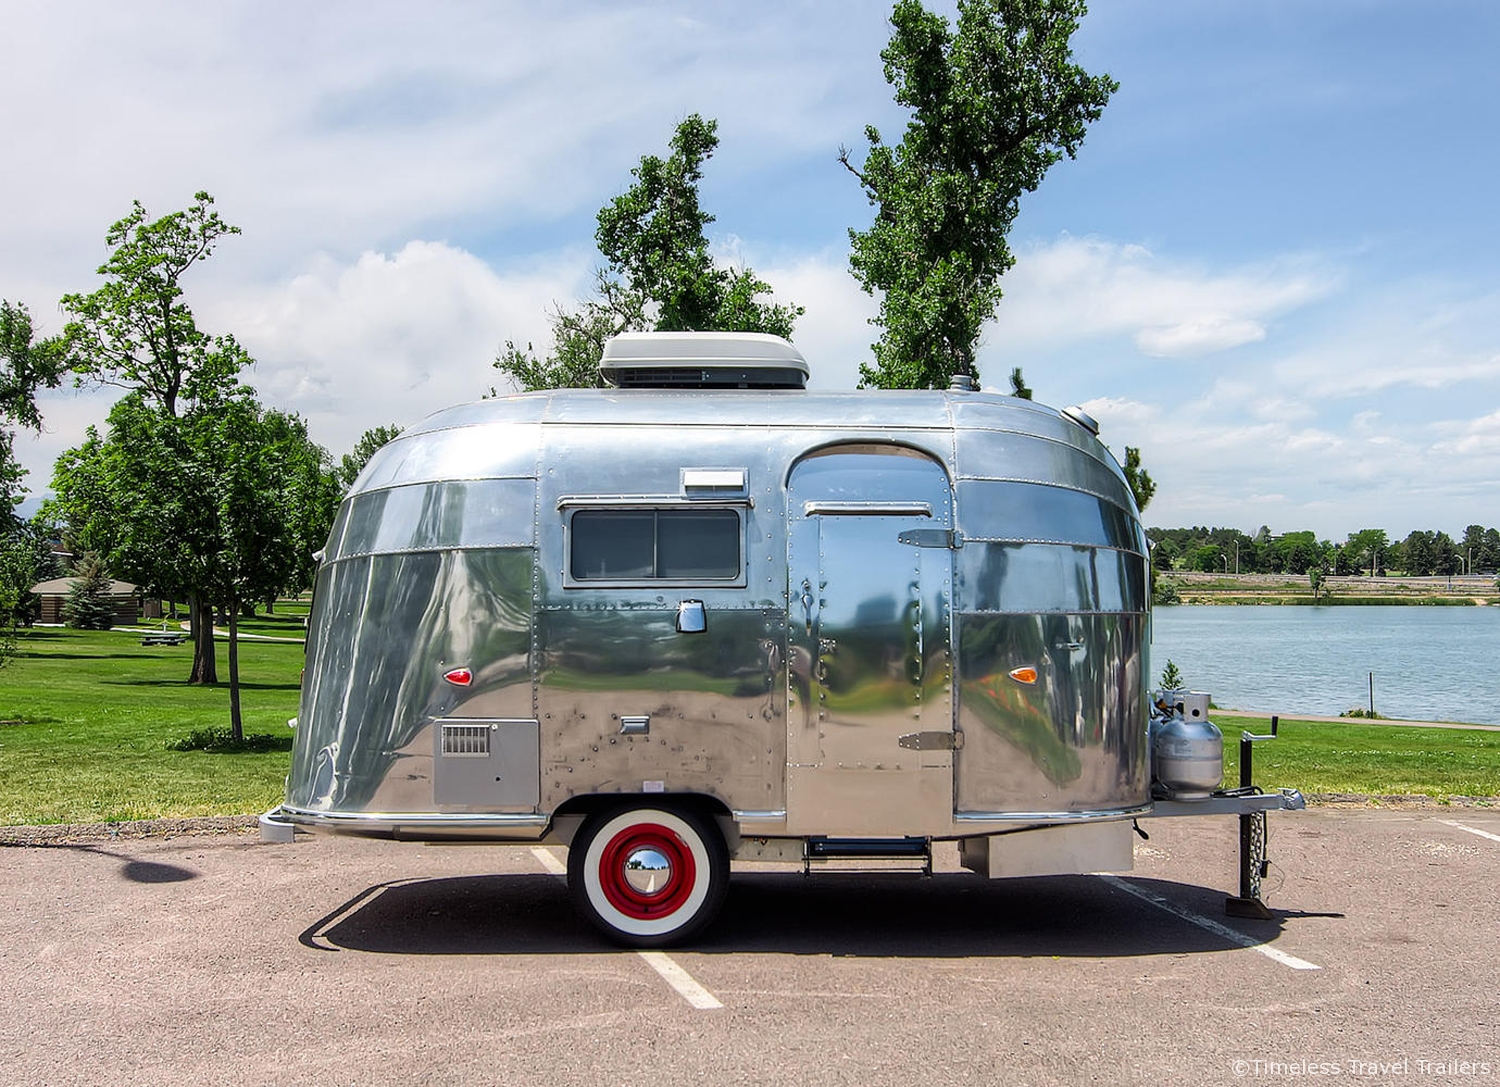 timeless travel trailers